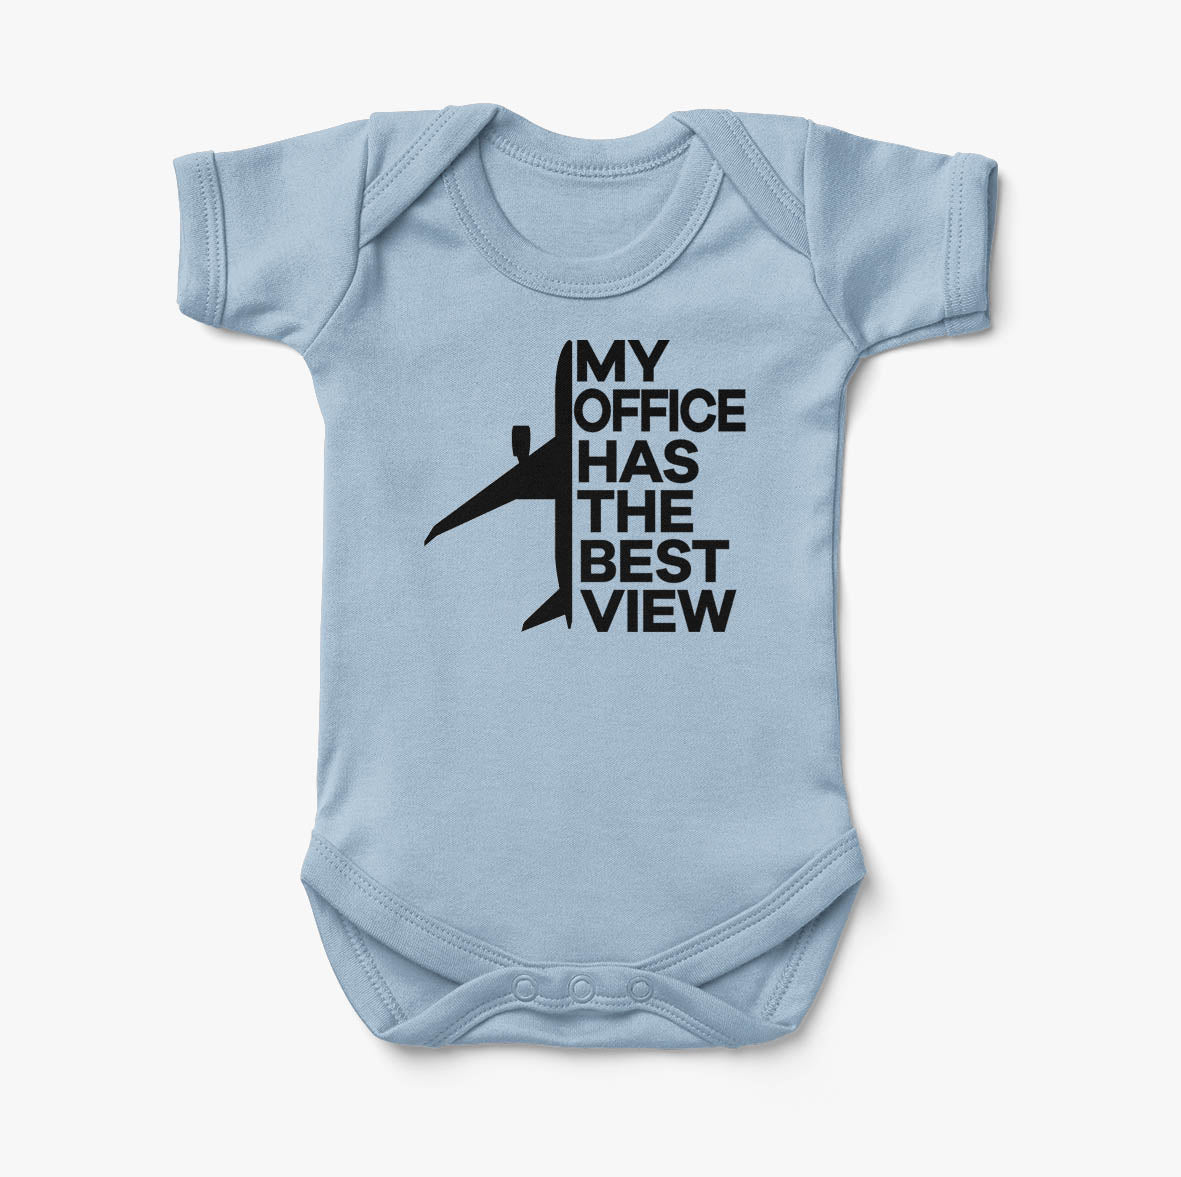 My Office Has The Best View Designed Baby Bodysuits